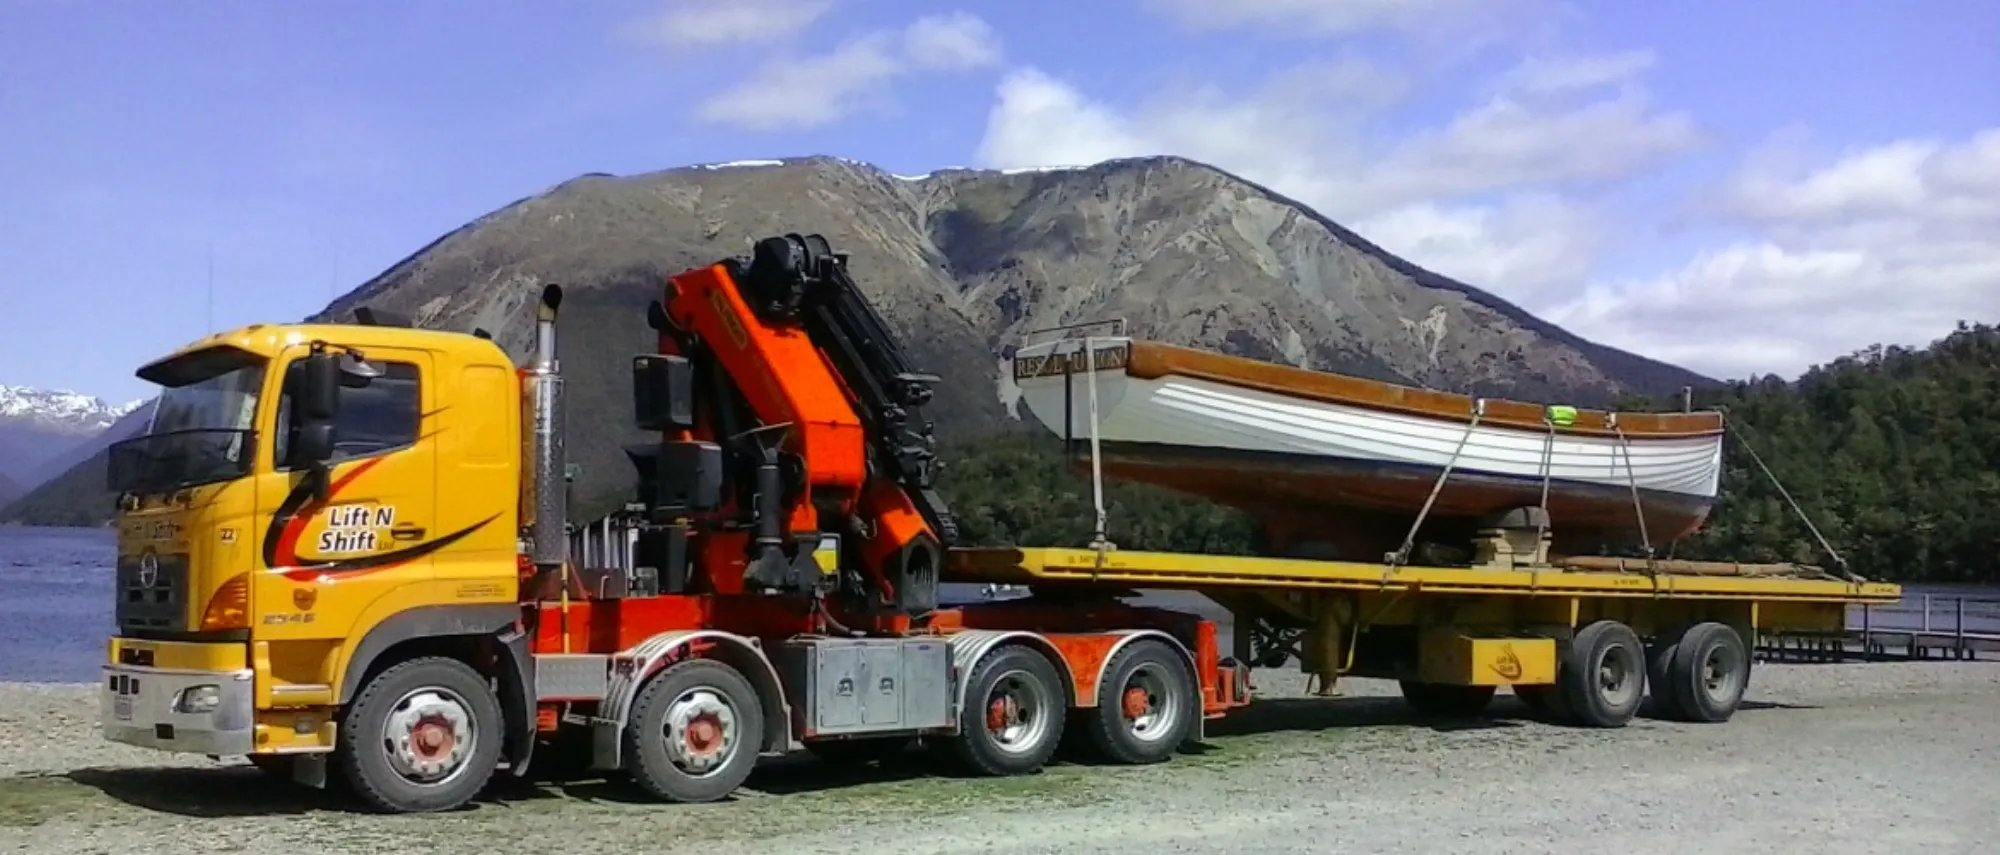 Lift N Shift can move boats! Specialised lowbeds, semi-trailers, trombone trailers and concrete panel trailers to move equipment with ease.